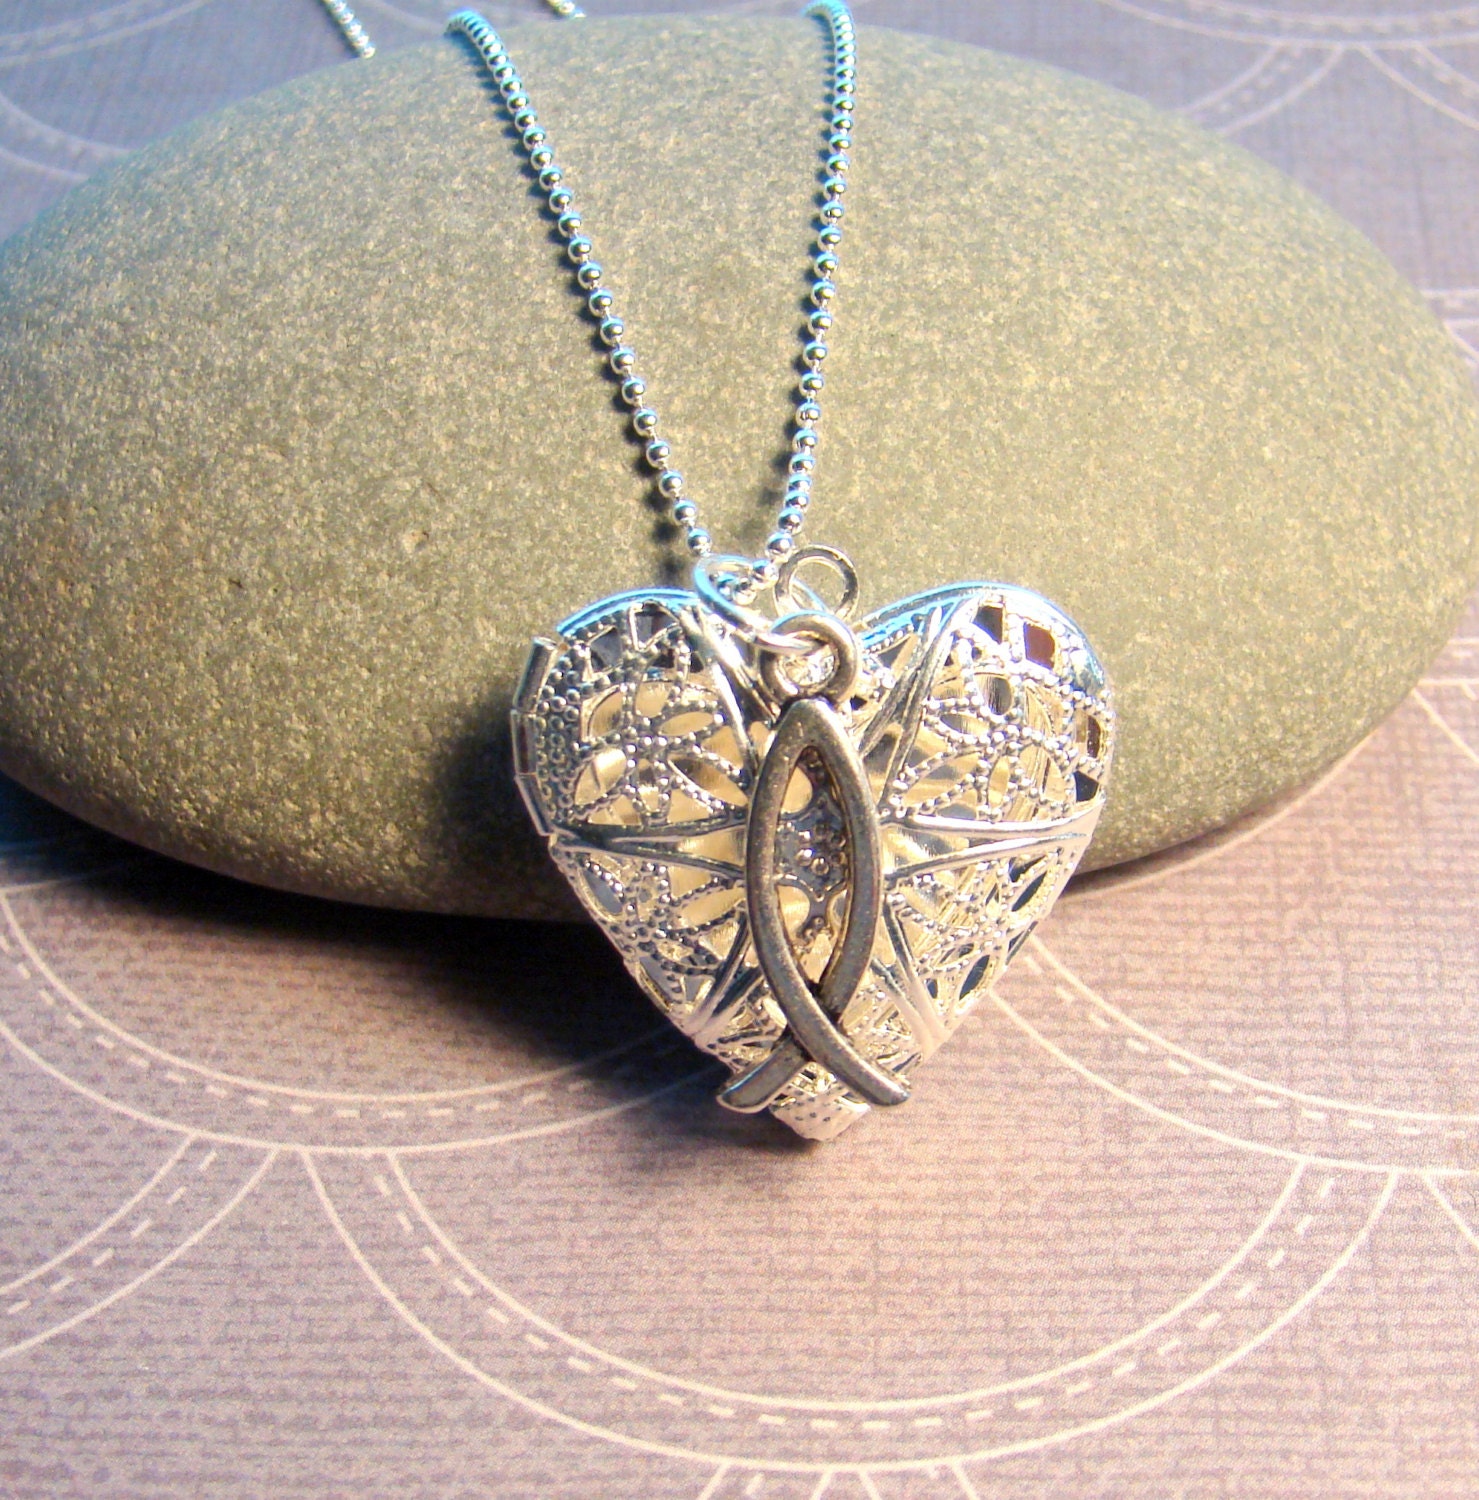 FAITH Essential Oil Diffuser Necklace Heart Shaped Oil